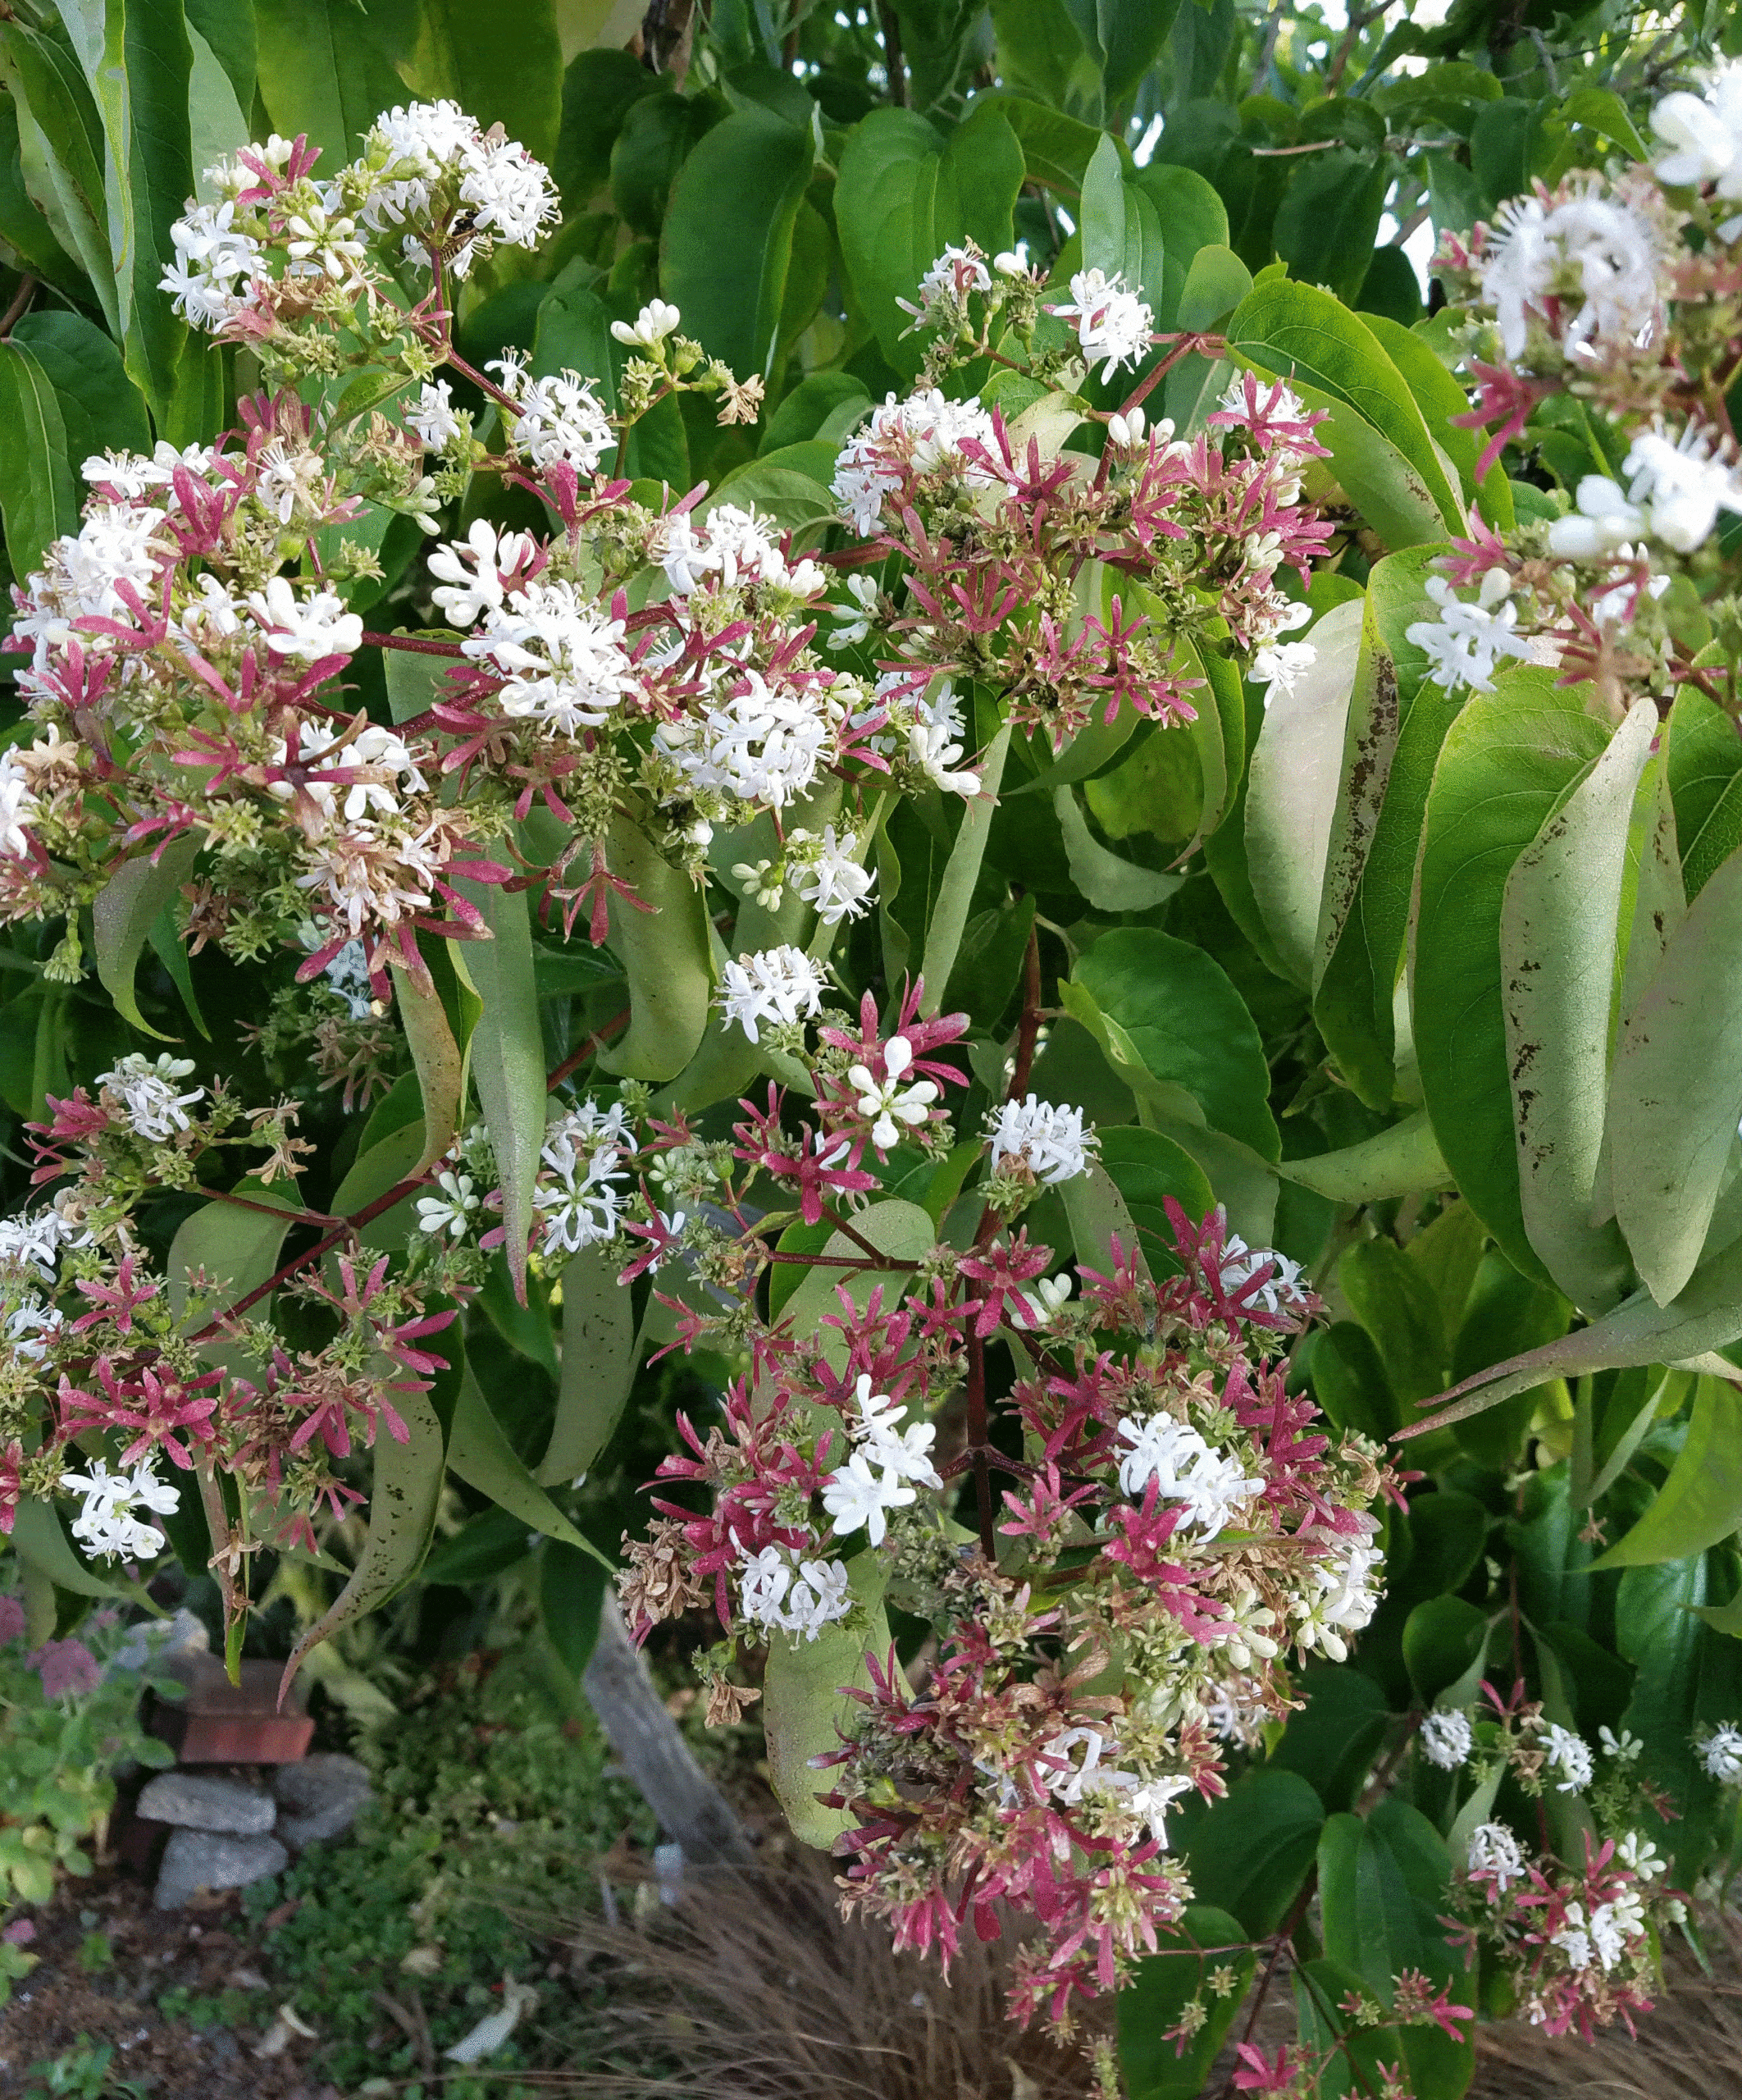 A September bloomer, Heptacodium miconioides, commonly known as seven sons plant has white flower clusters followed by vivid red bracts that last through October.